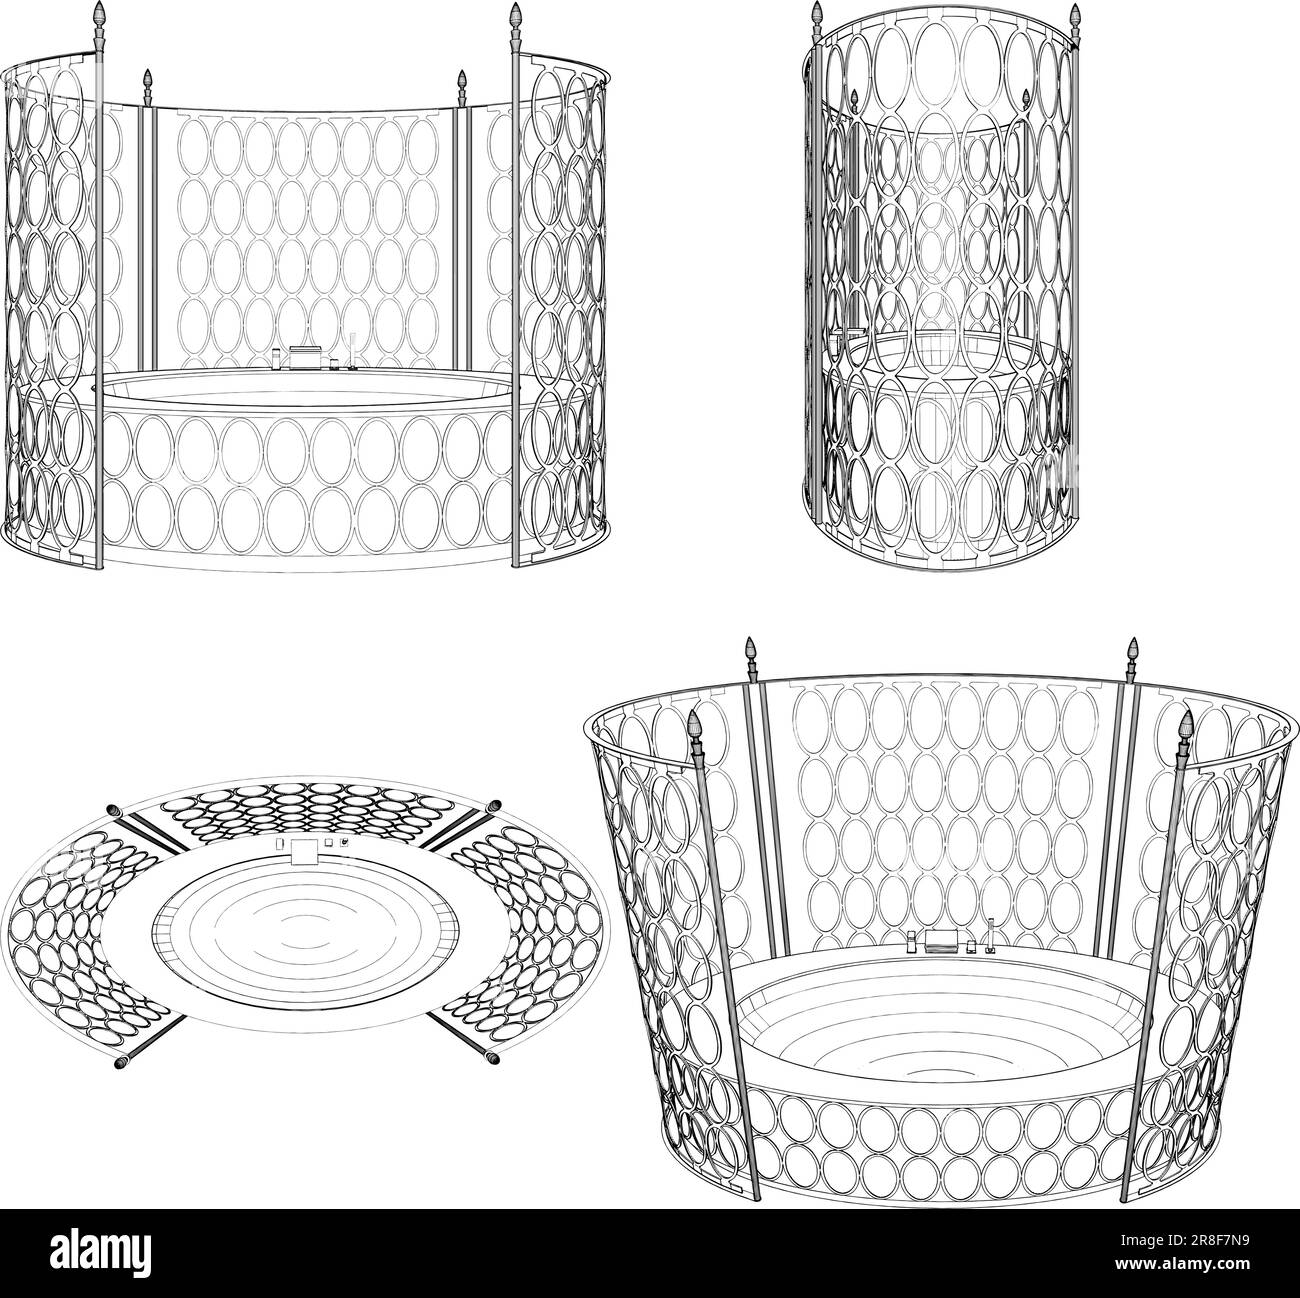 Bathroom Tub With Metal Fence Vector. Illustration Isolated On White Background. A vector illustration Of An Modern Bathroom Tub. Stock Vector